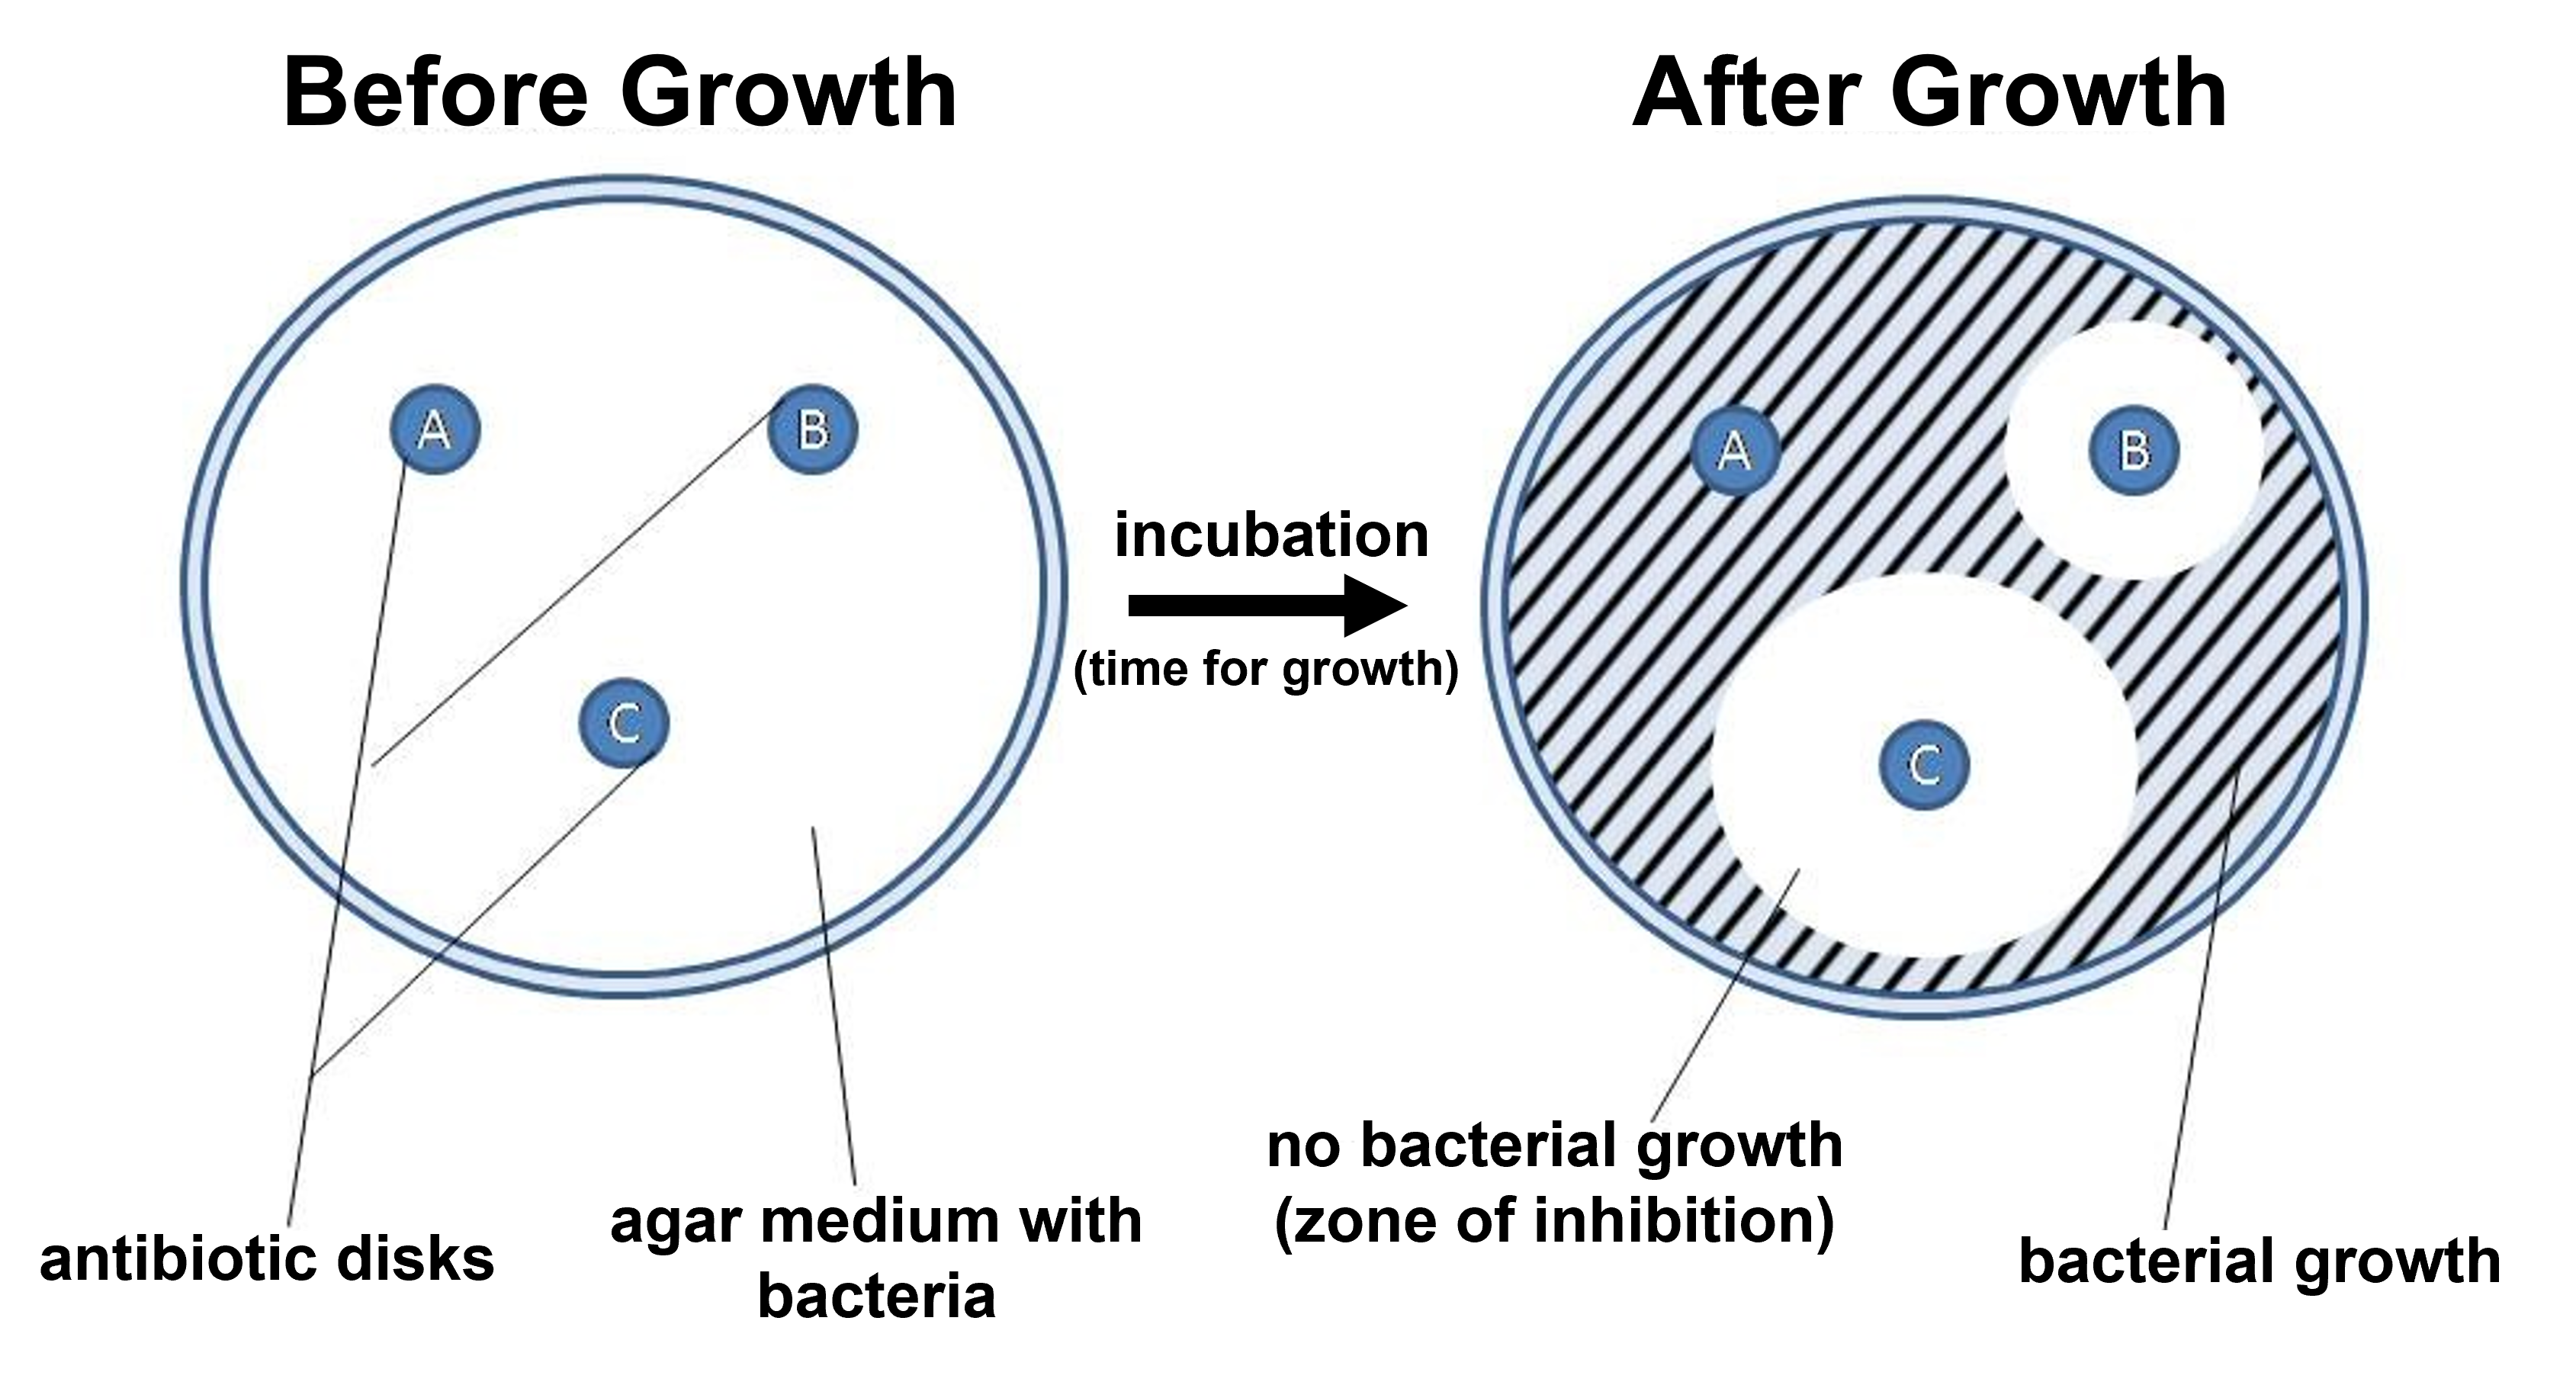 streaking a petri plate with bacteria and adding antibiotic discs produces circular regions where there is no growth surrounding the antibiotic discs called zones of inhibition